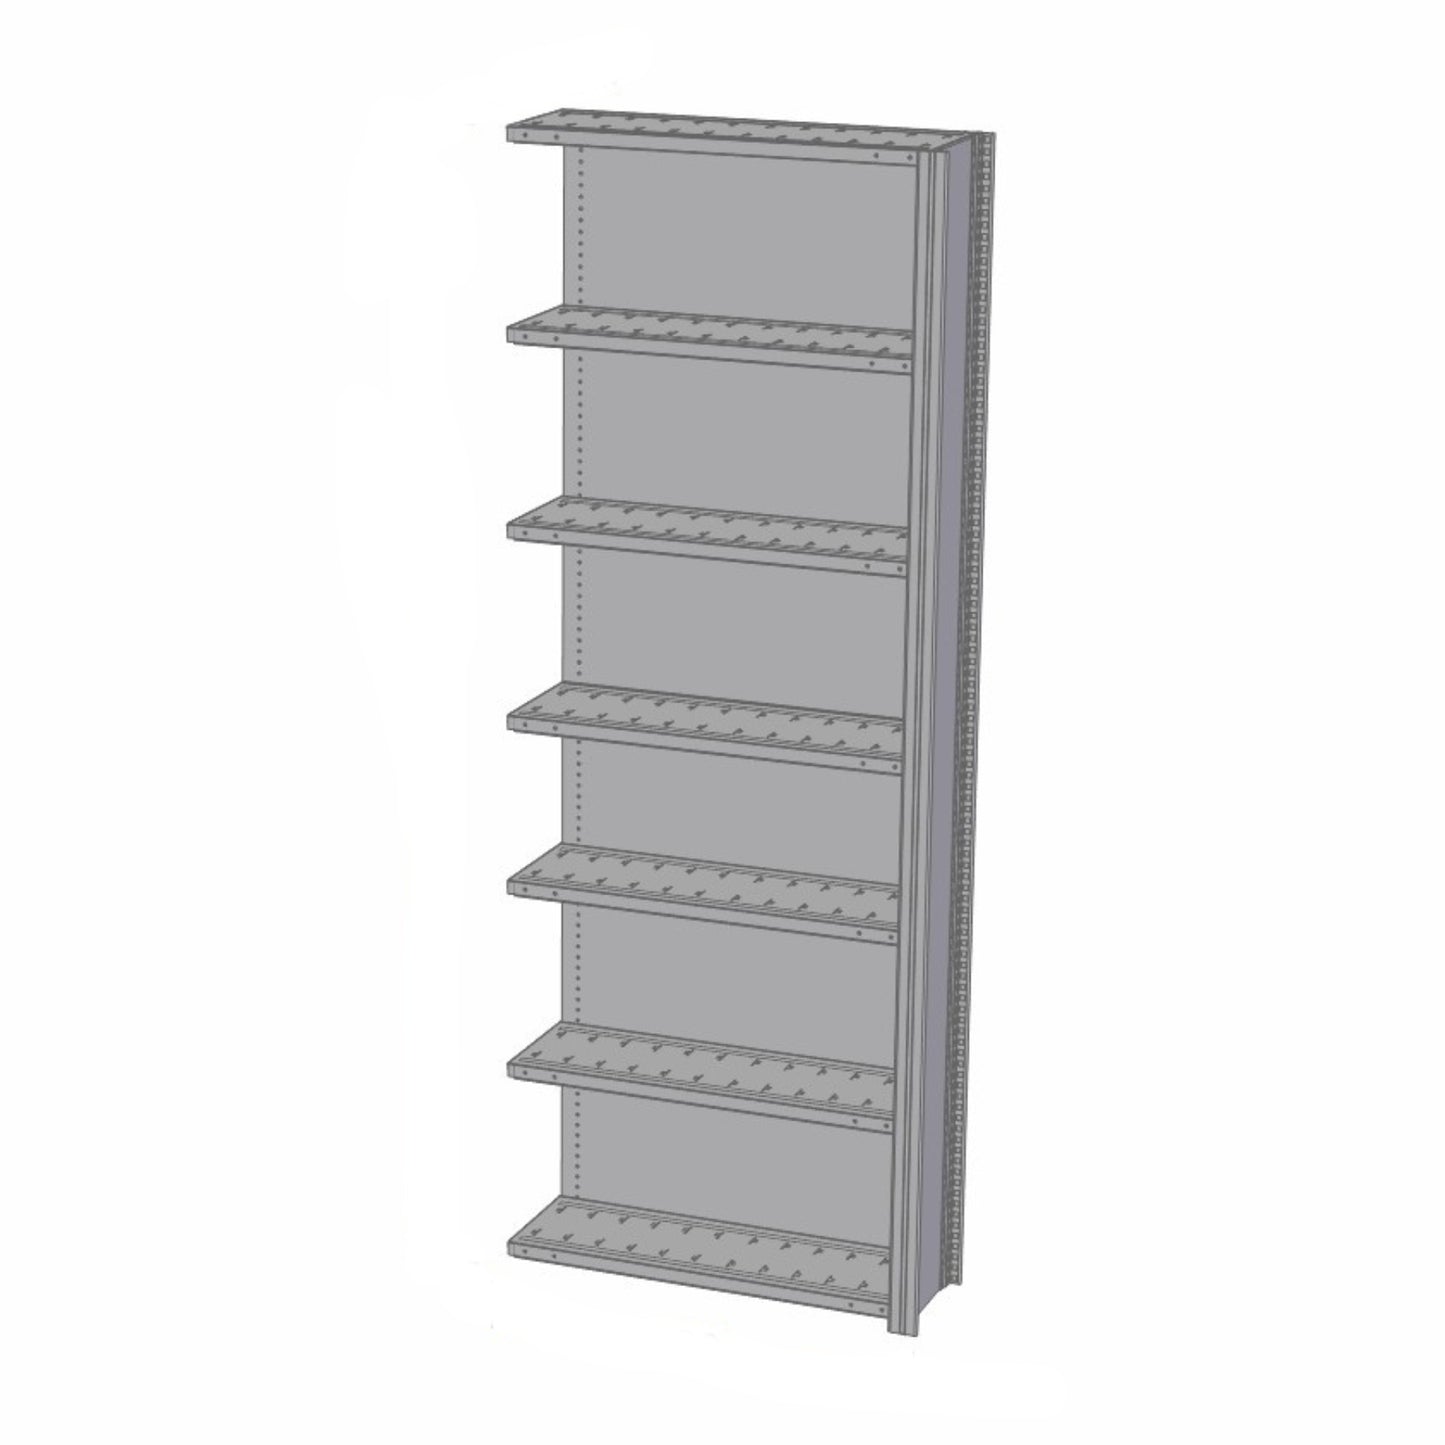 Shelving system 99 height x 36 width x 24 depth | Option: Open / Closed